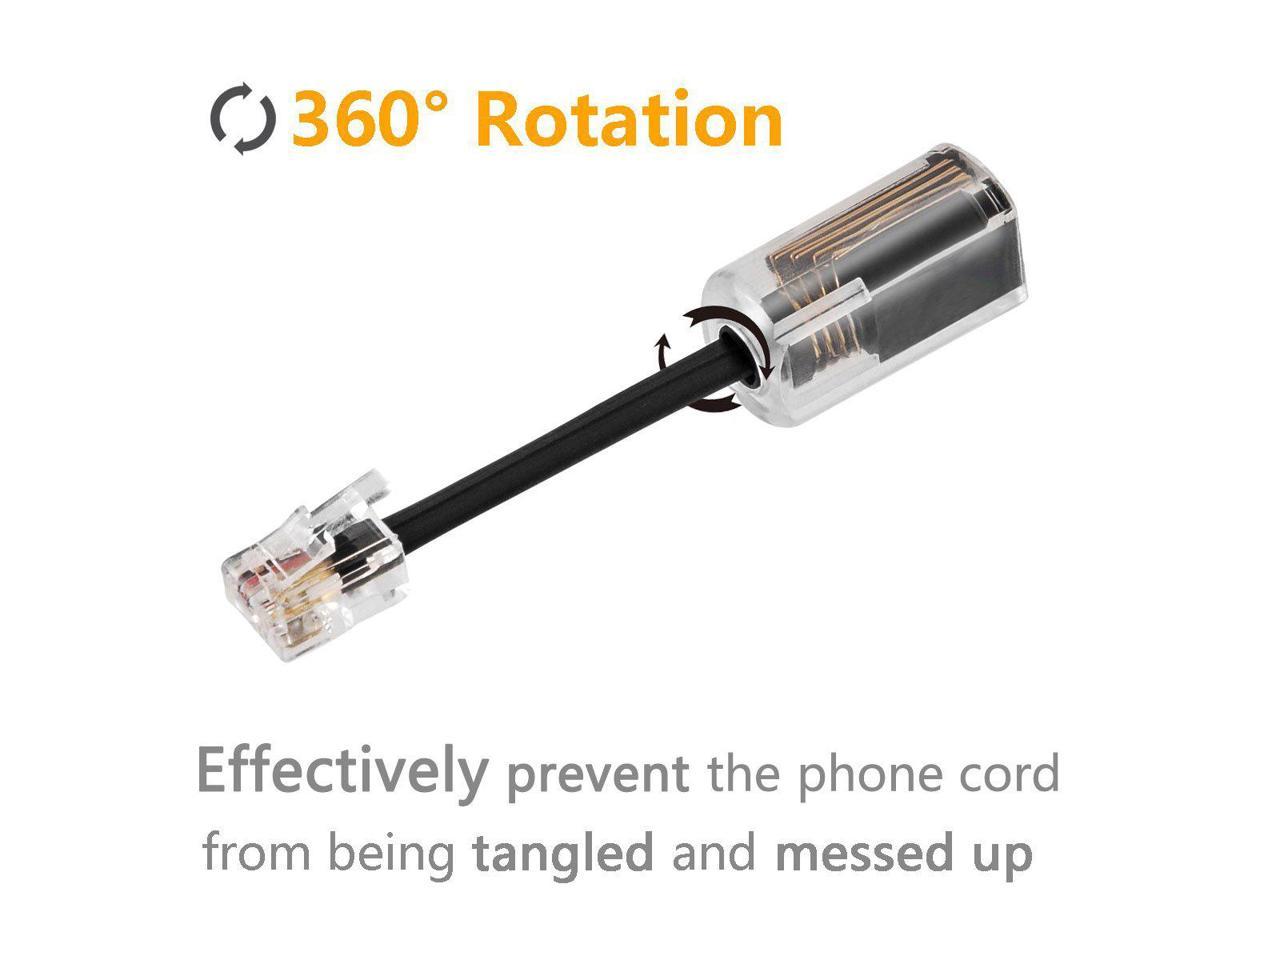 Tangle-Free 360 Degree Rotation Plug into Landline Phone for Use in Home or Office Power Gear Black Phone Cord Detangler 46084 2 Pack